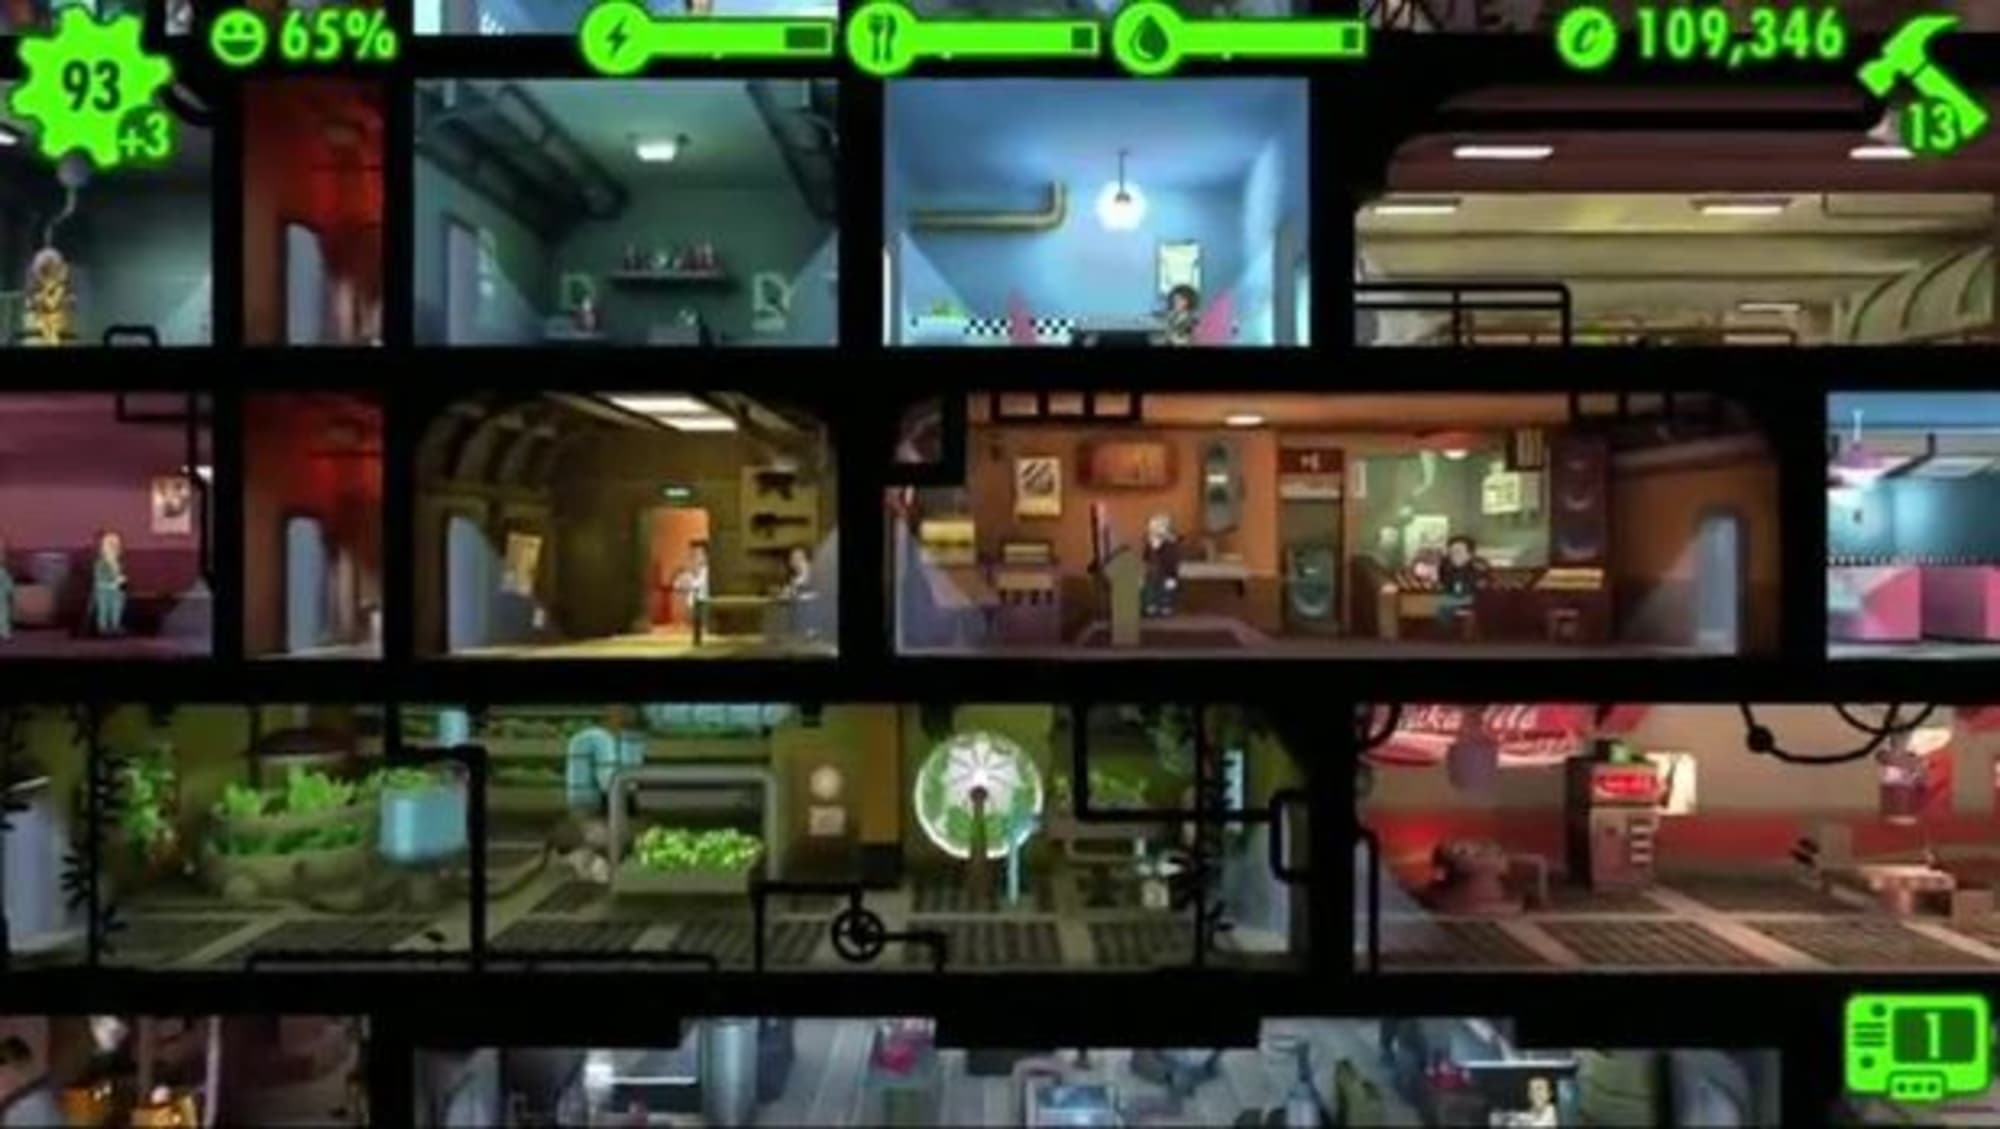 free download ps4 fallout shelter